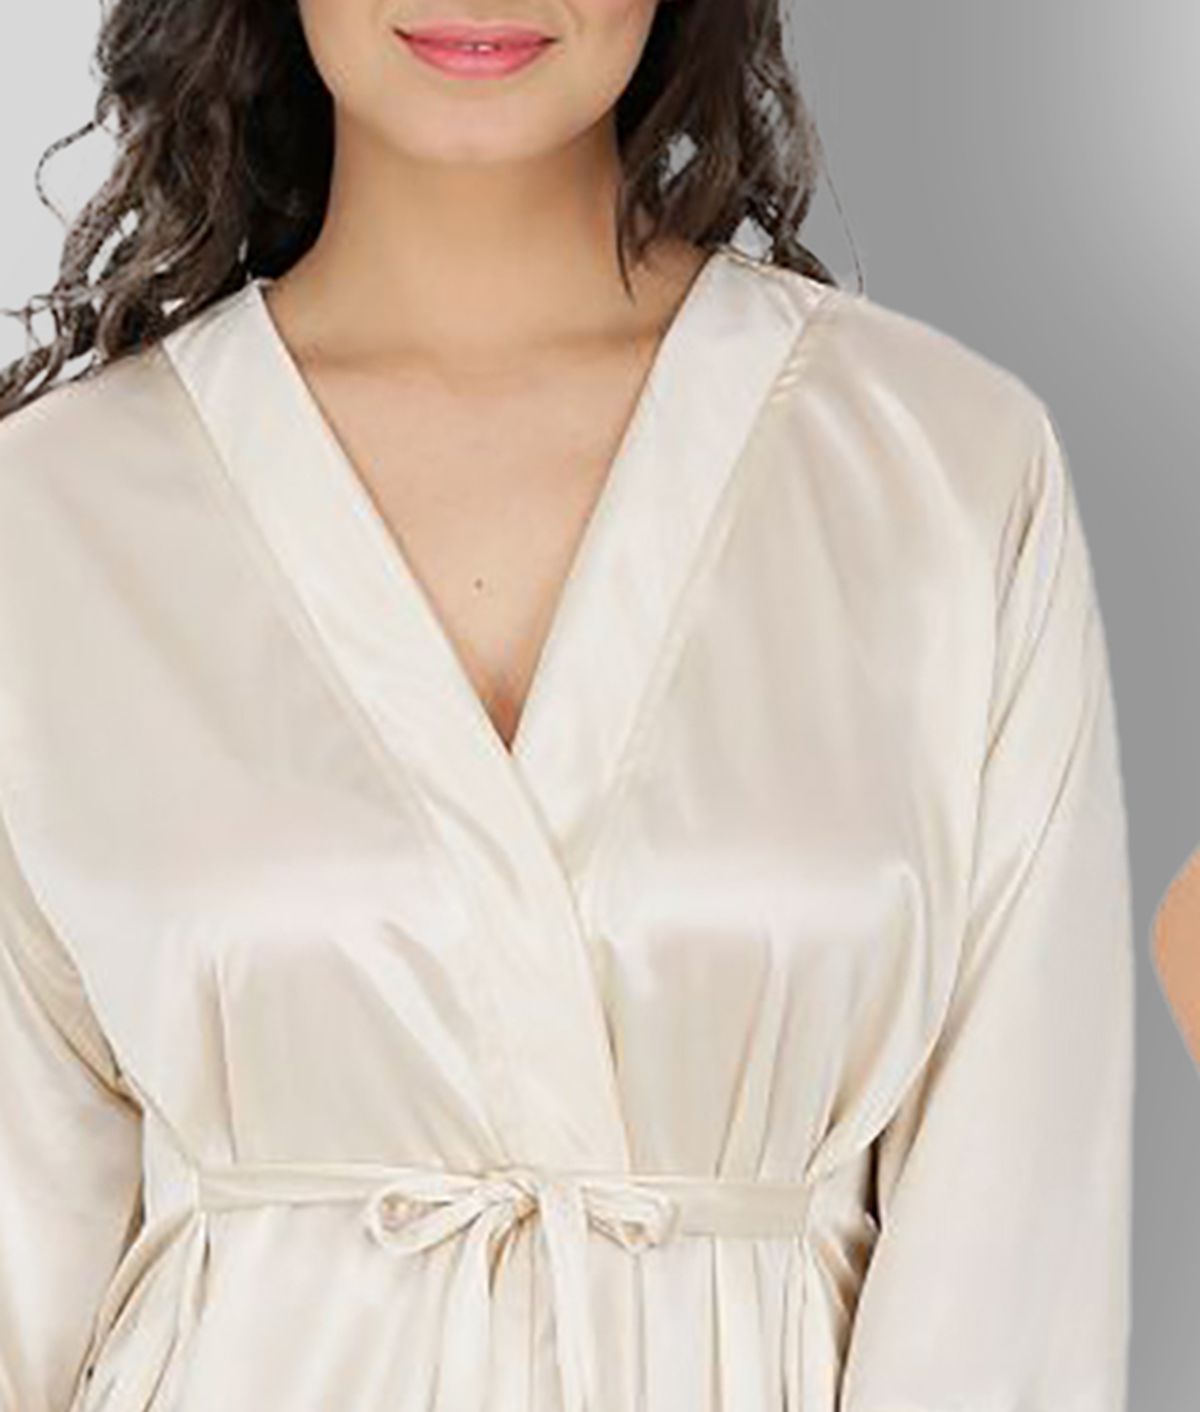 Buy Klamotten Multicolor Satin Womens Nightwear Nighty And Night Gowns Pack Of 2 Online At 